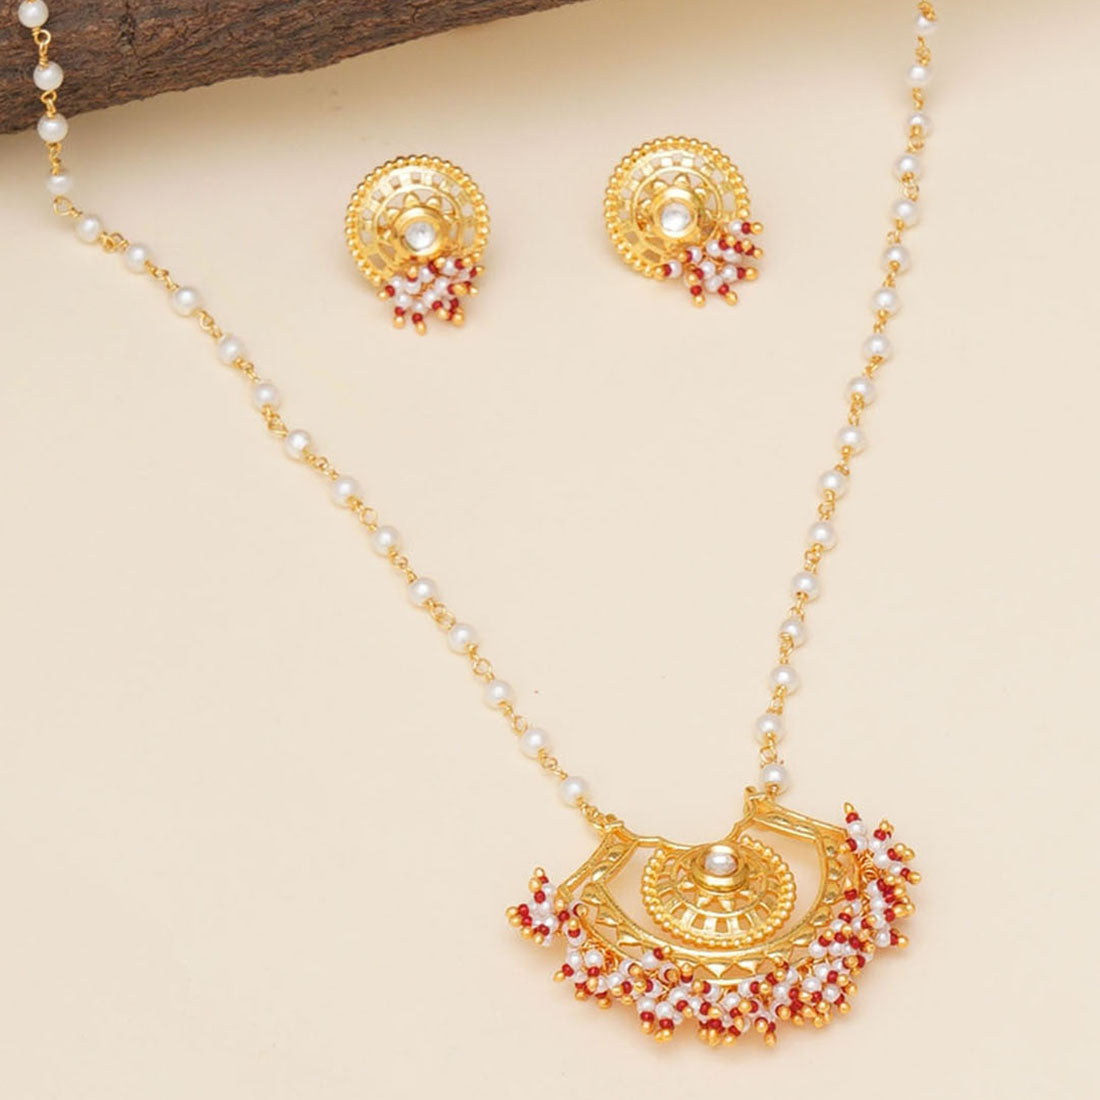 Buy Rajkanya Gold Plated Long Necklace Set Online at Low Prices in India -  Paytmmall.com